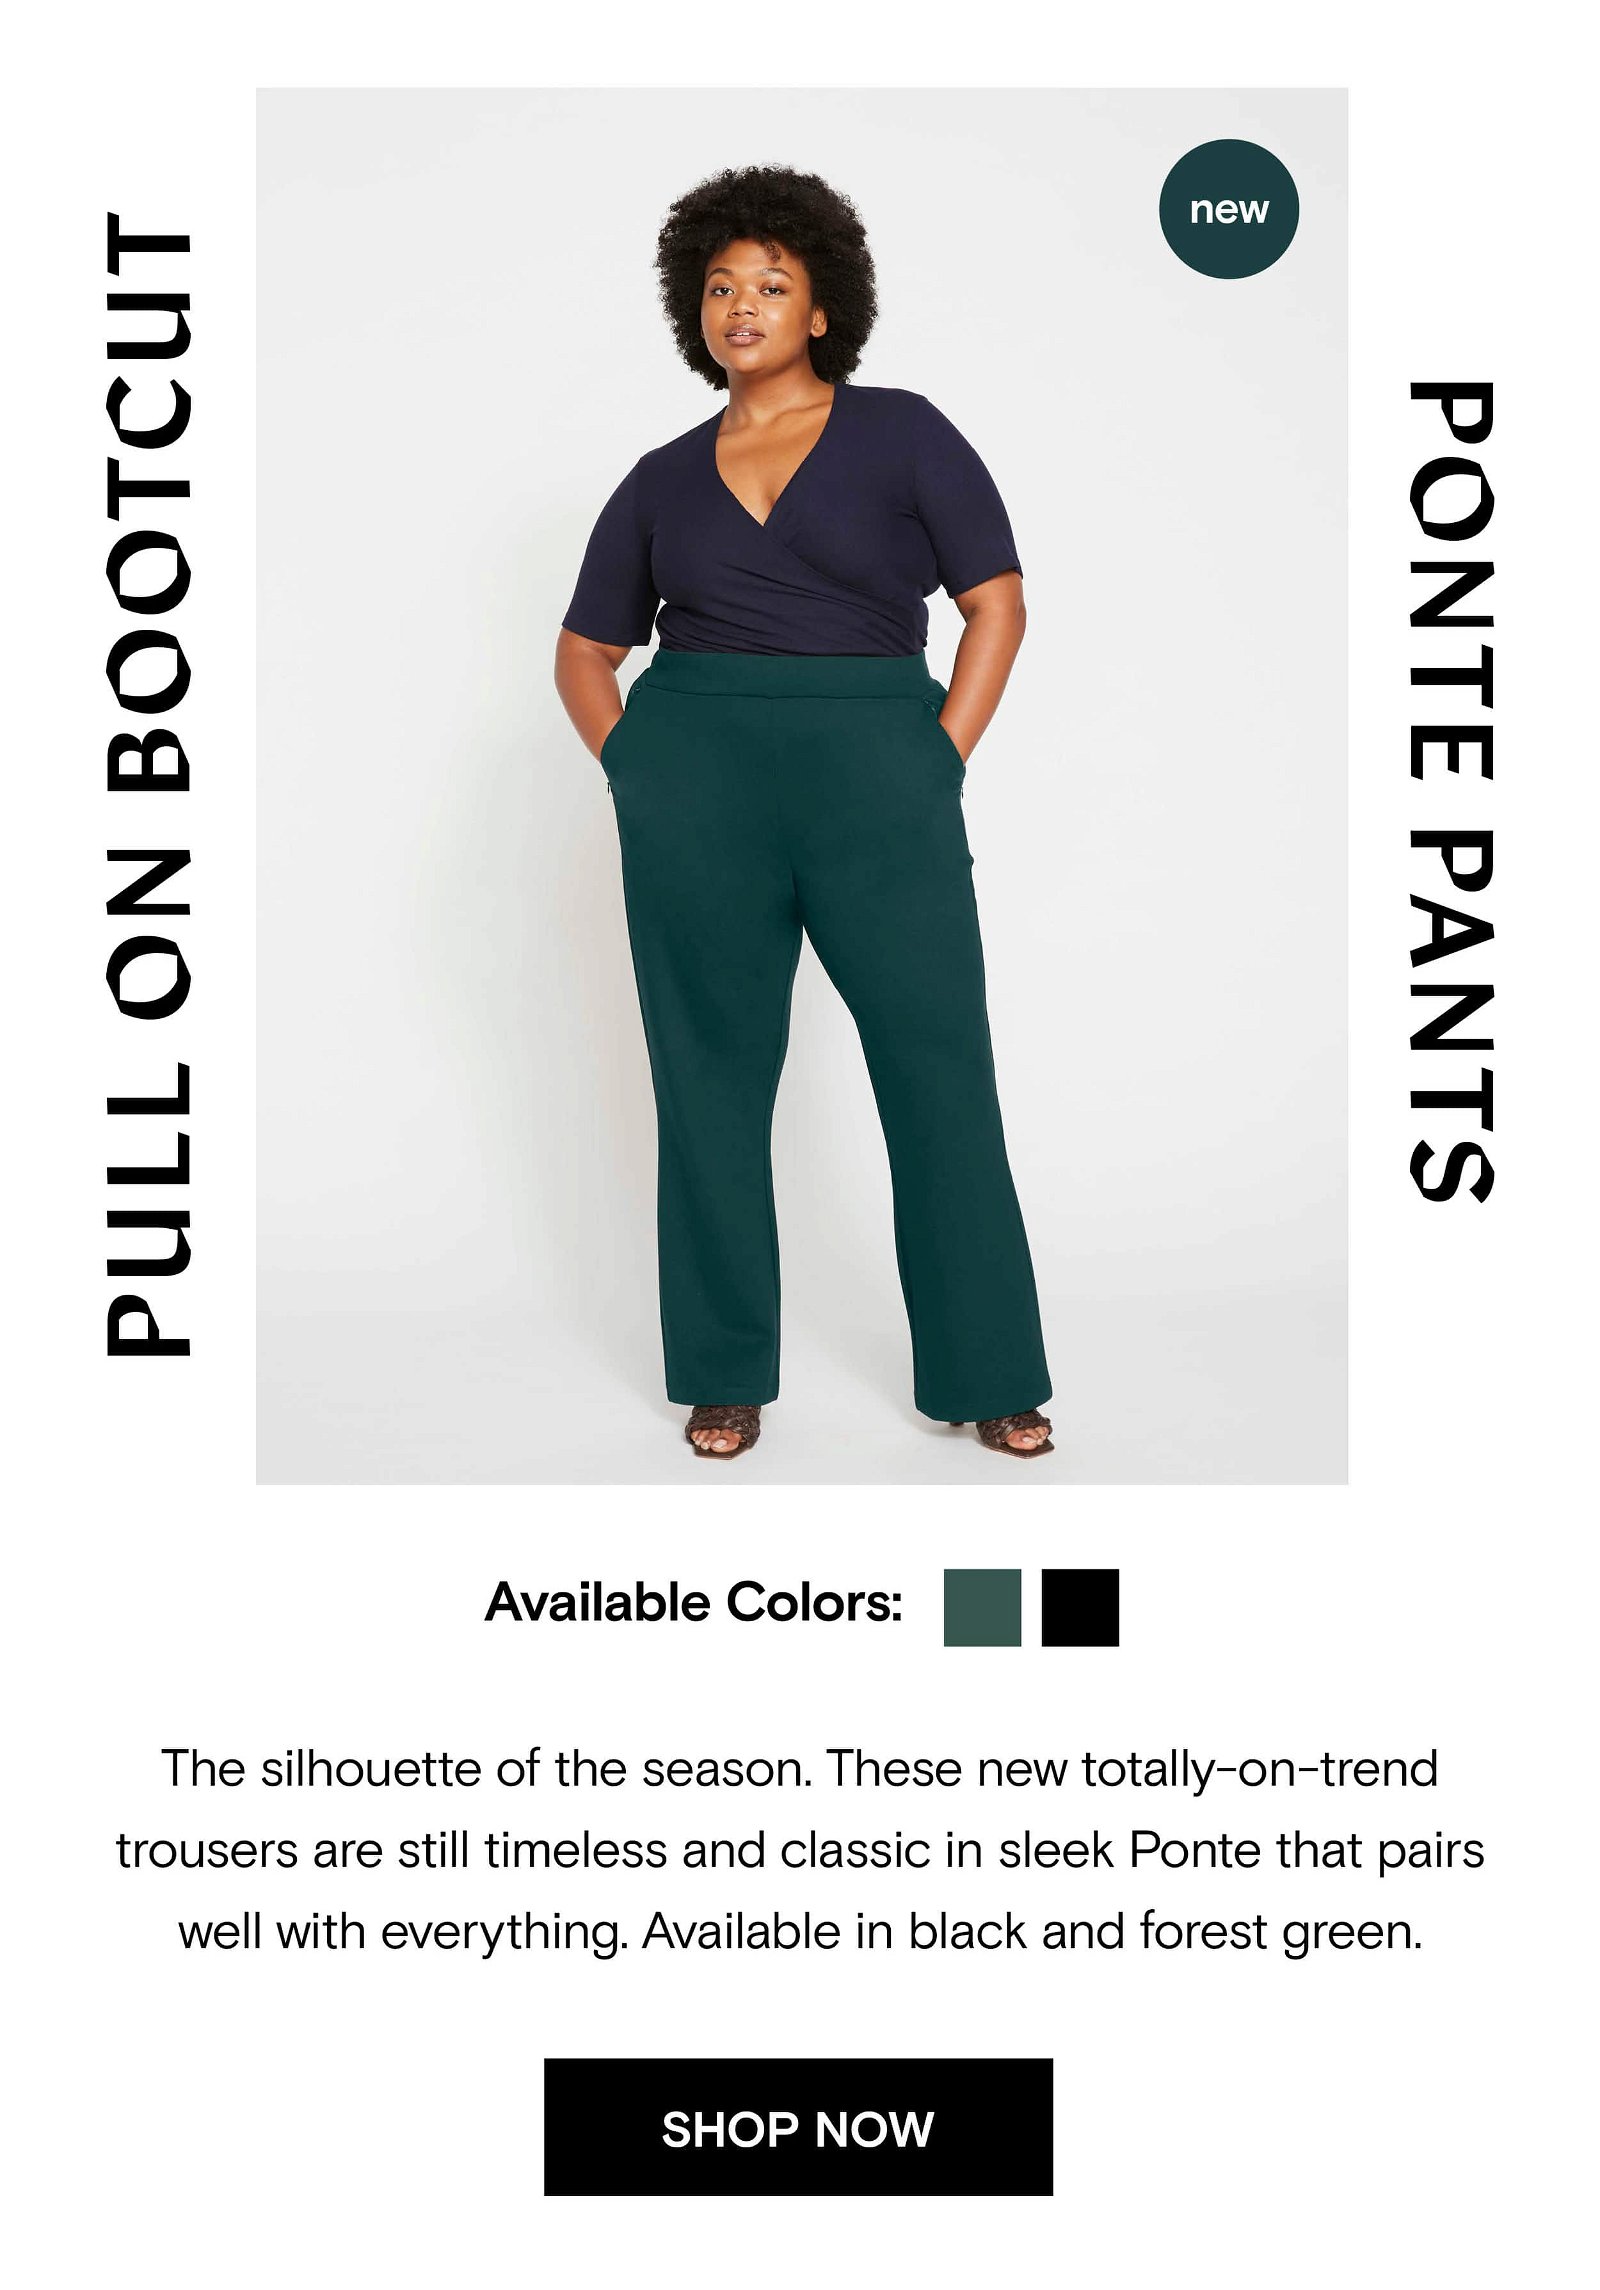 The silhouette of the season. These new totally-on-trend trousers are still timeless and classic in sleek Ponte that pairs well with everything. Available in black and forest green.